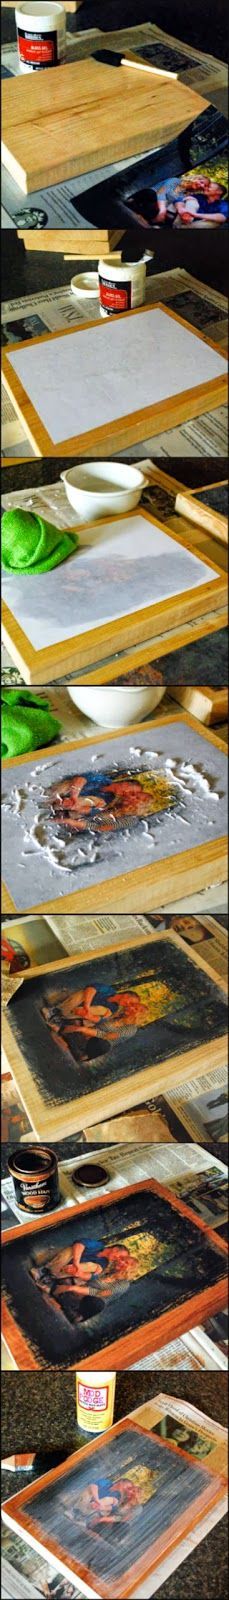 Photo transfer onto Wood – pinned over 25,000 times. Makes simple and inexpensive Christmas gifts!